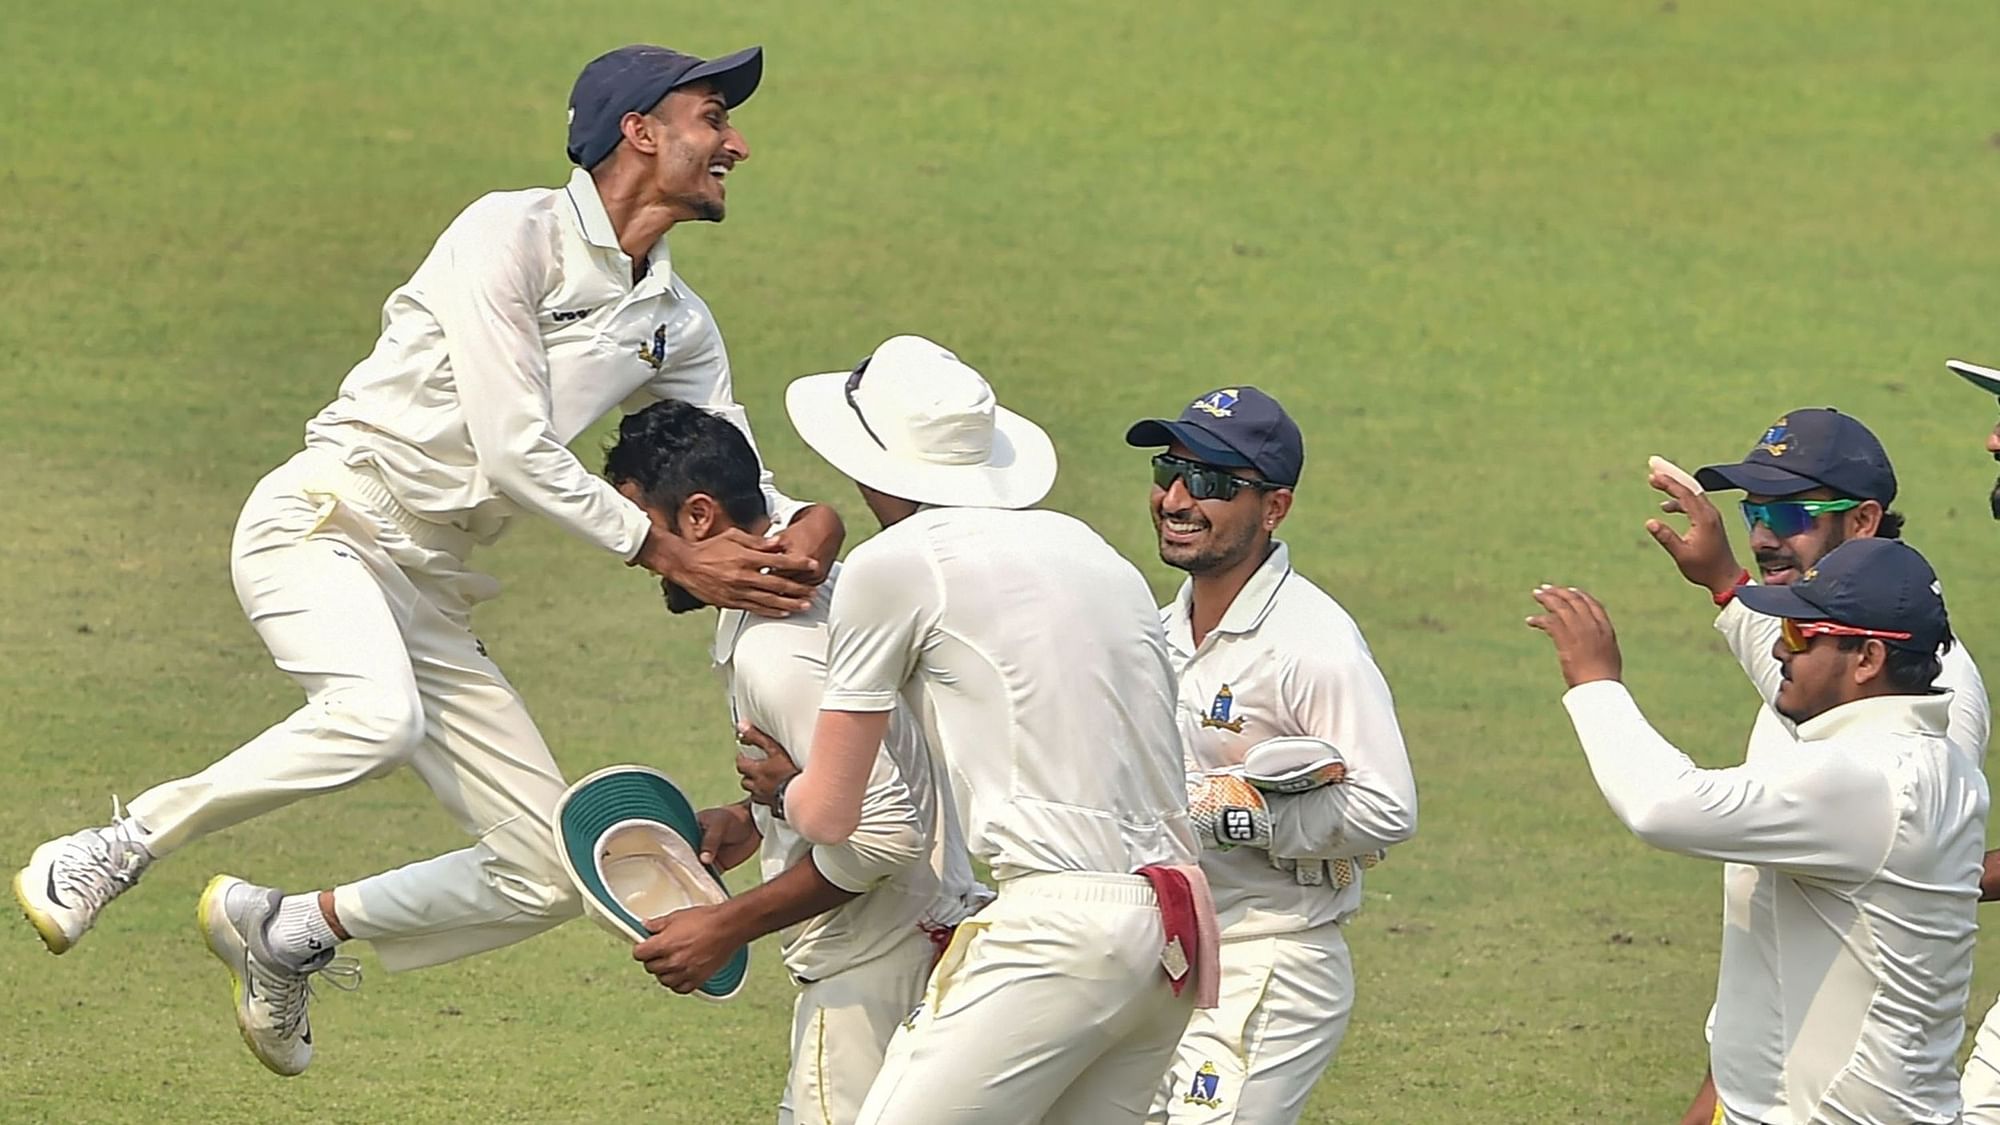 The format of the Ranji Trophy will change from four groups, which was the format last season, to a zonal basis. 